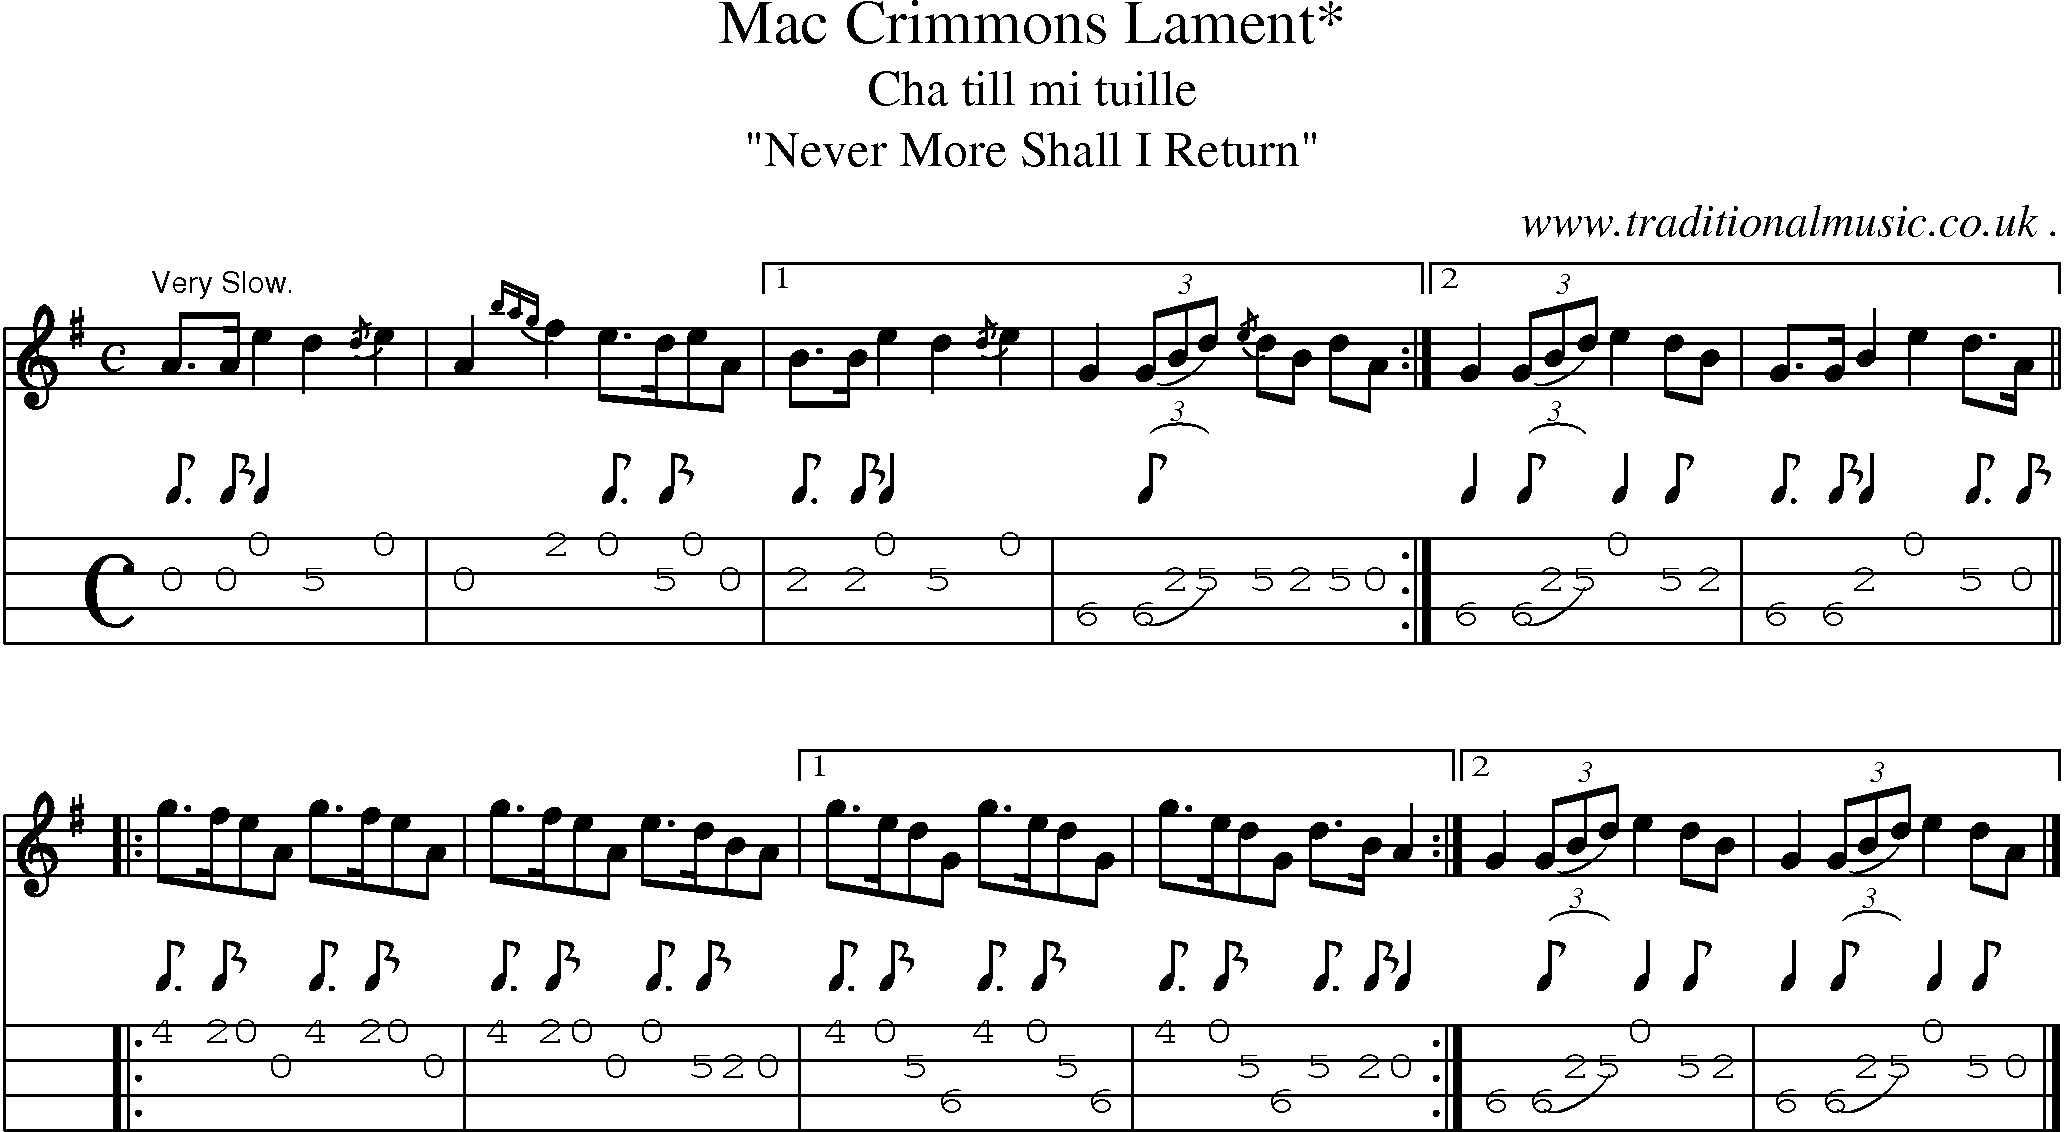 Sheet-music  score, Chords and Mandolin Tabs for Mac Crimmons Lament